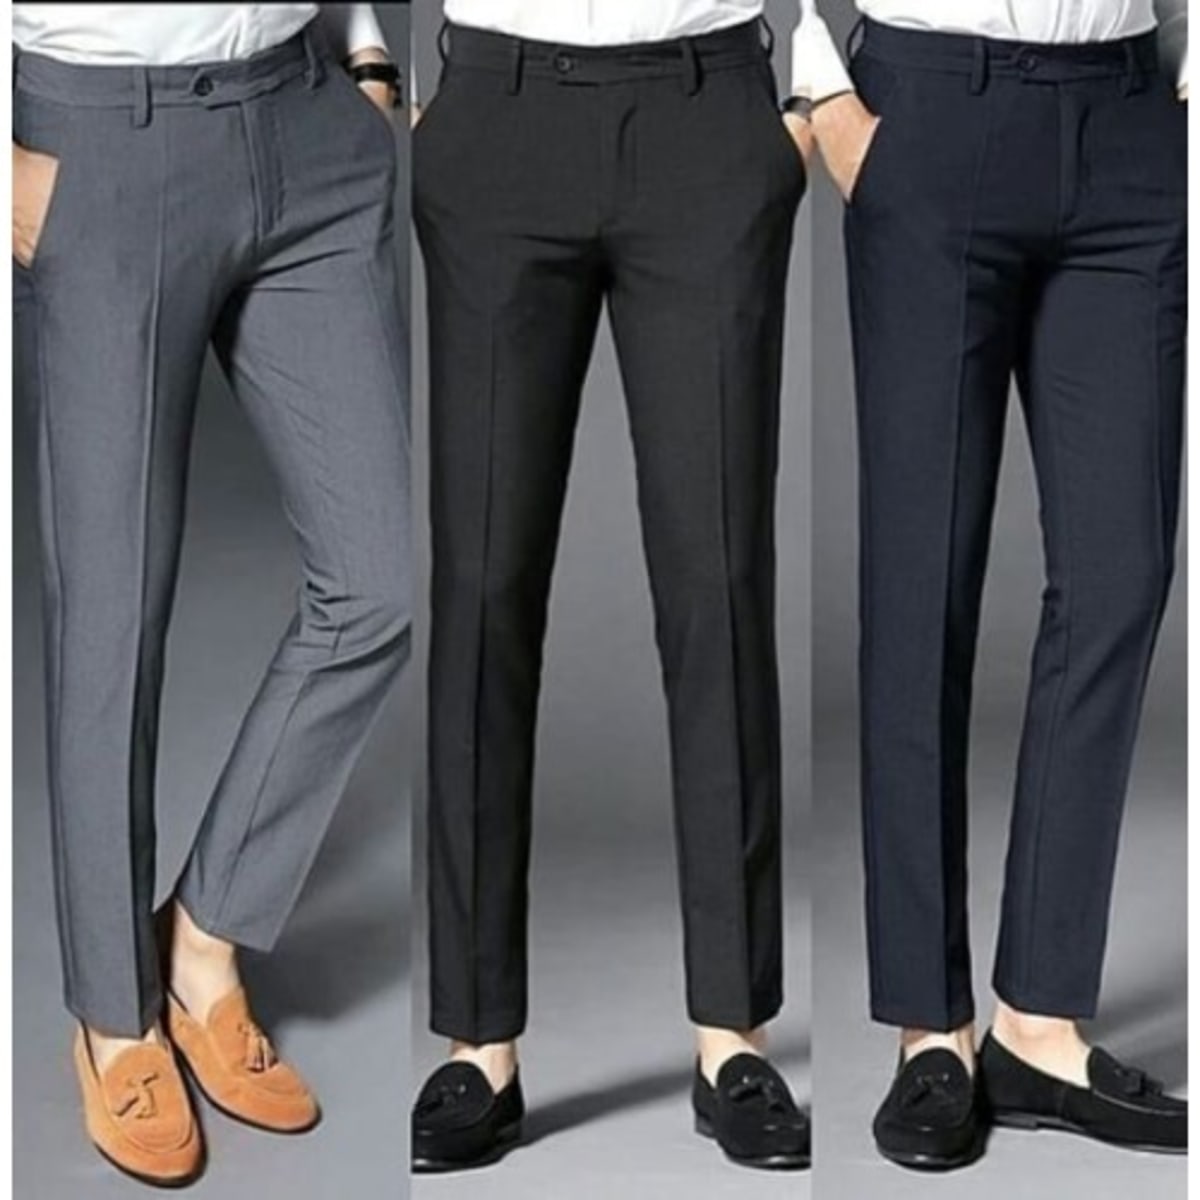 Top more than 82 black trousers mens cheap - in.cdgdbentre